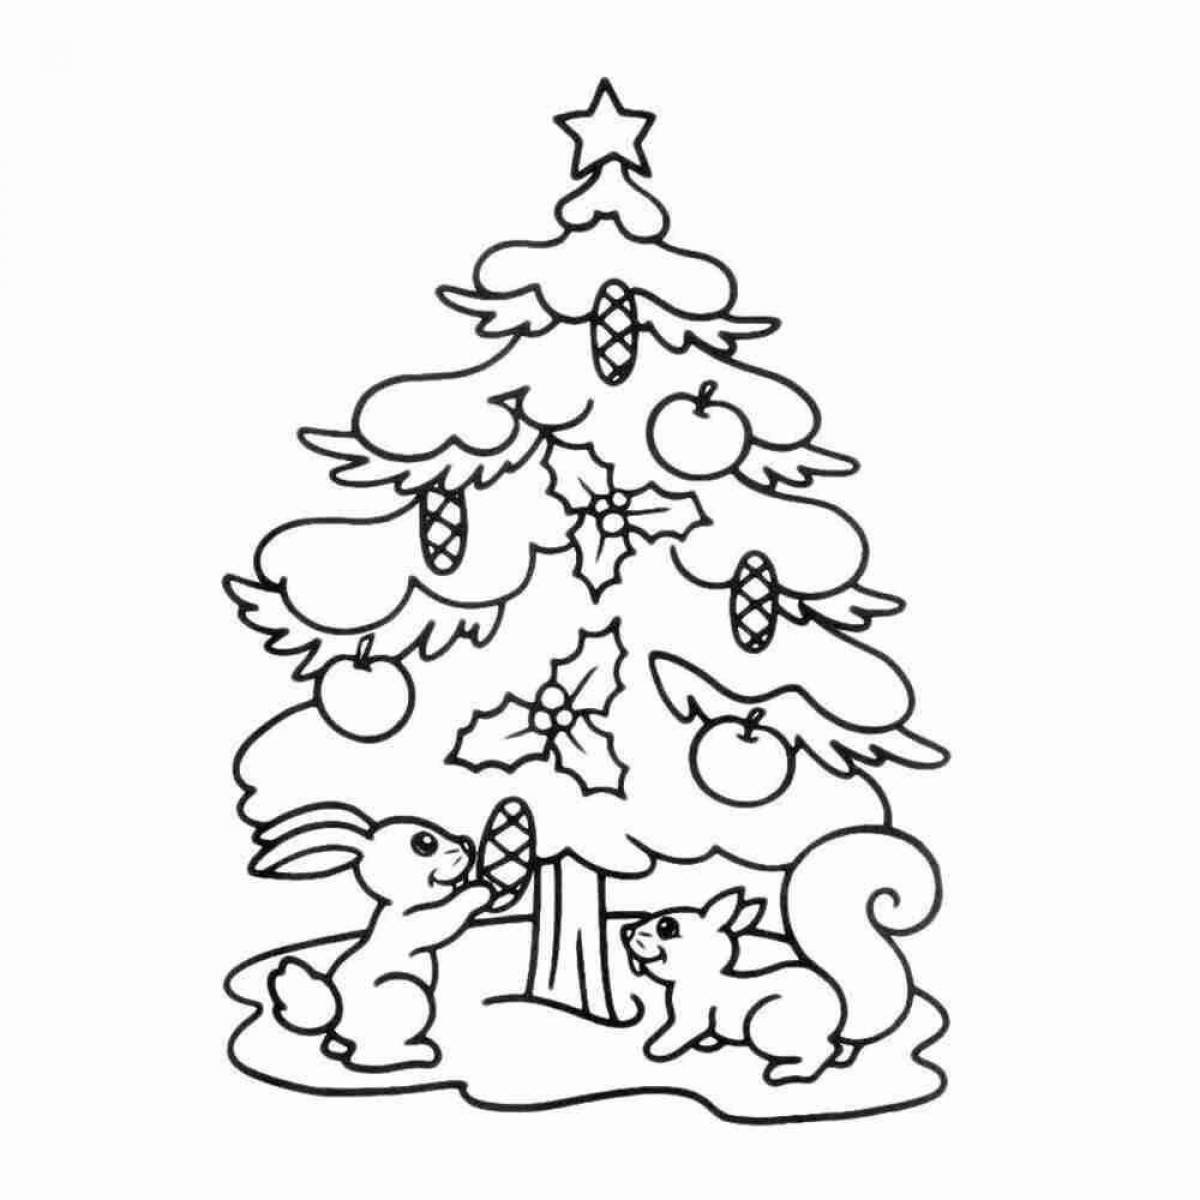 Glitter Christmas tree coloring book for children 5-6 years old